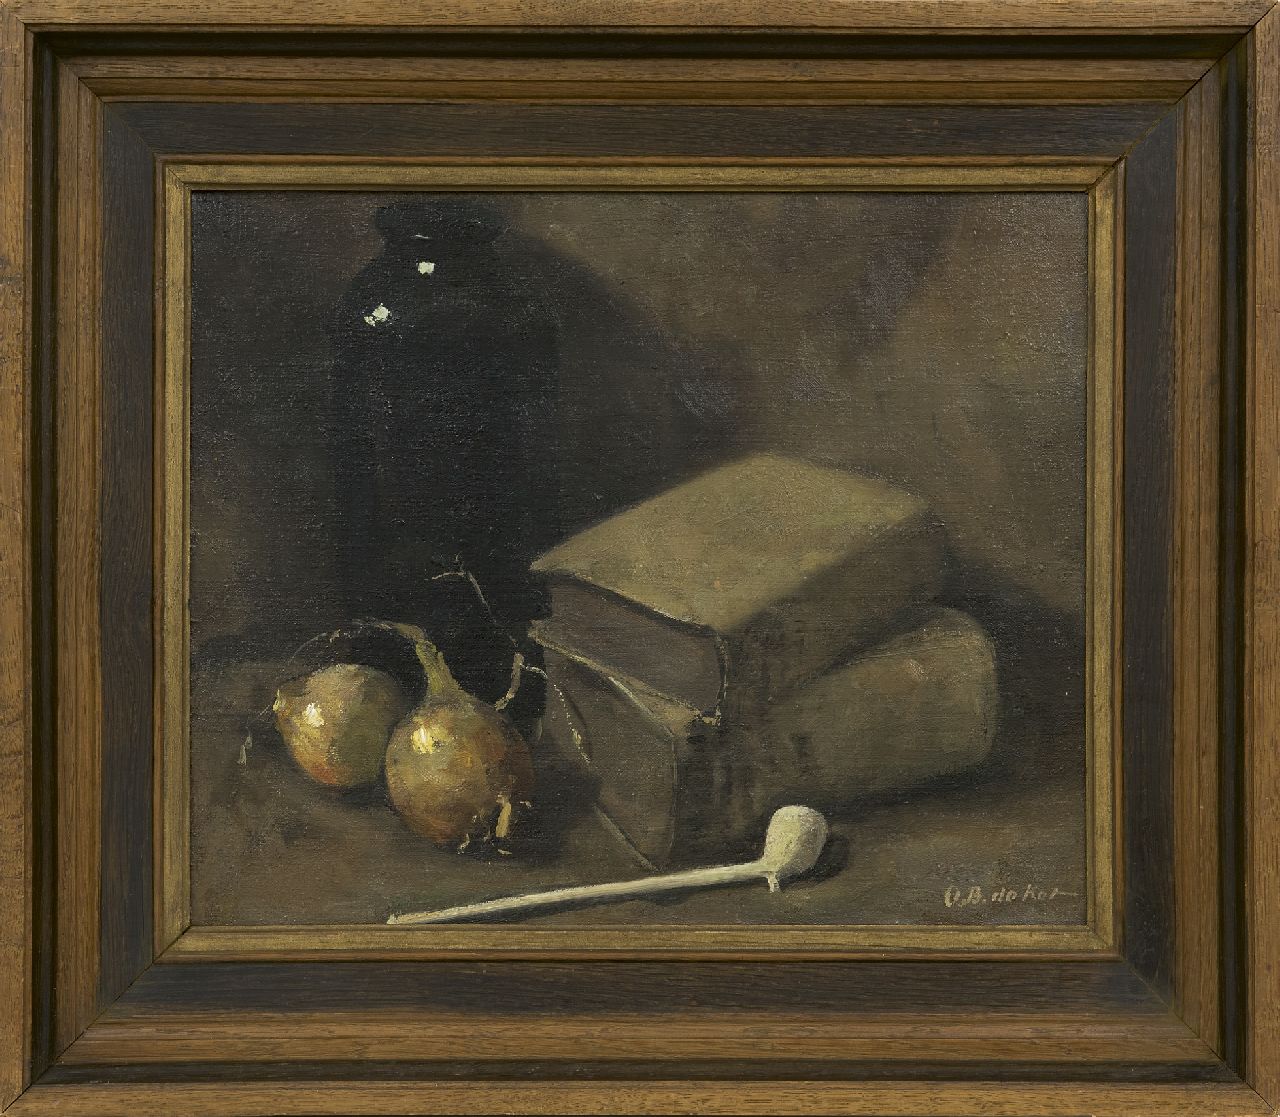 Kat O.B. de | 'Otto' Boudewijn de Kat, A still life with books, two onions and a Gouda pipe, oil on canvas 34.5 x 42.2 cm, signed l.r.